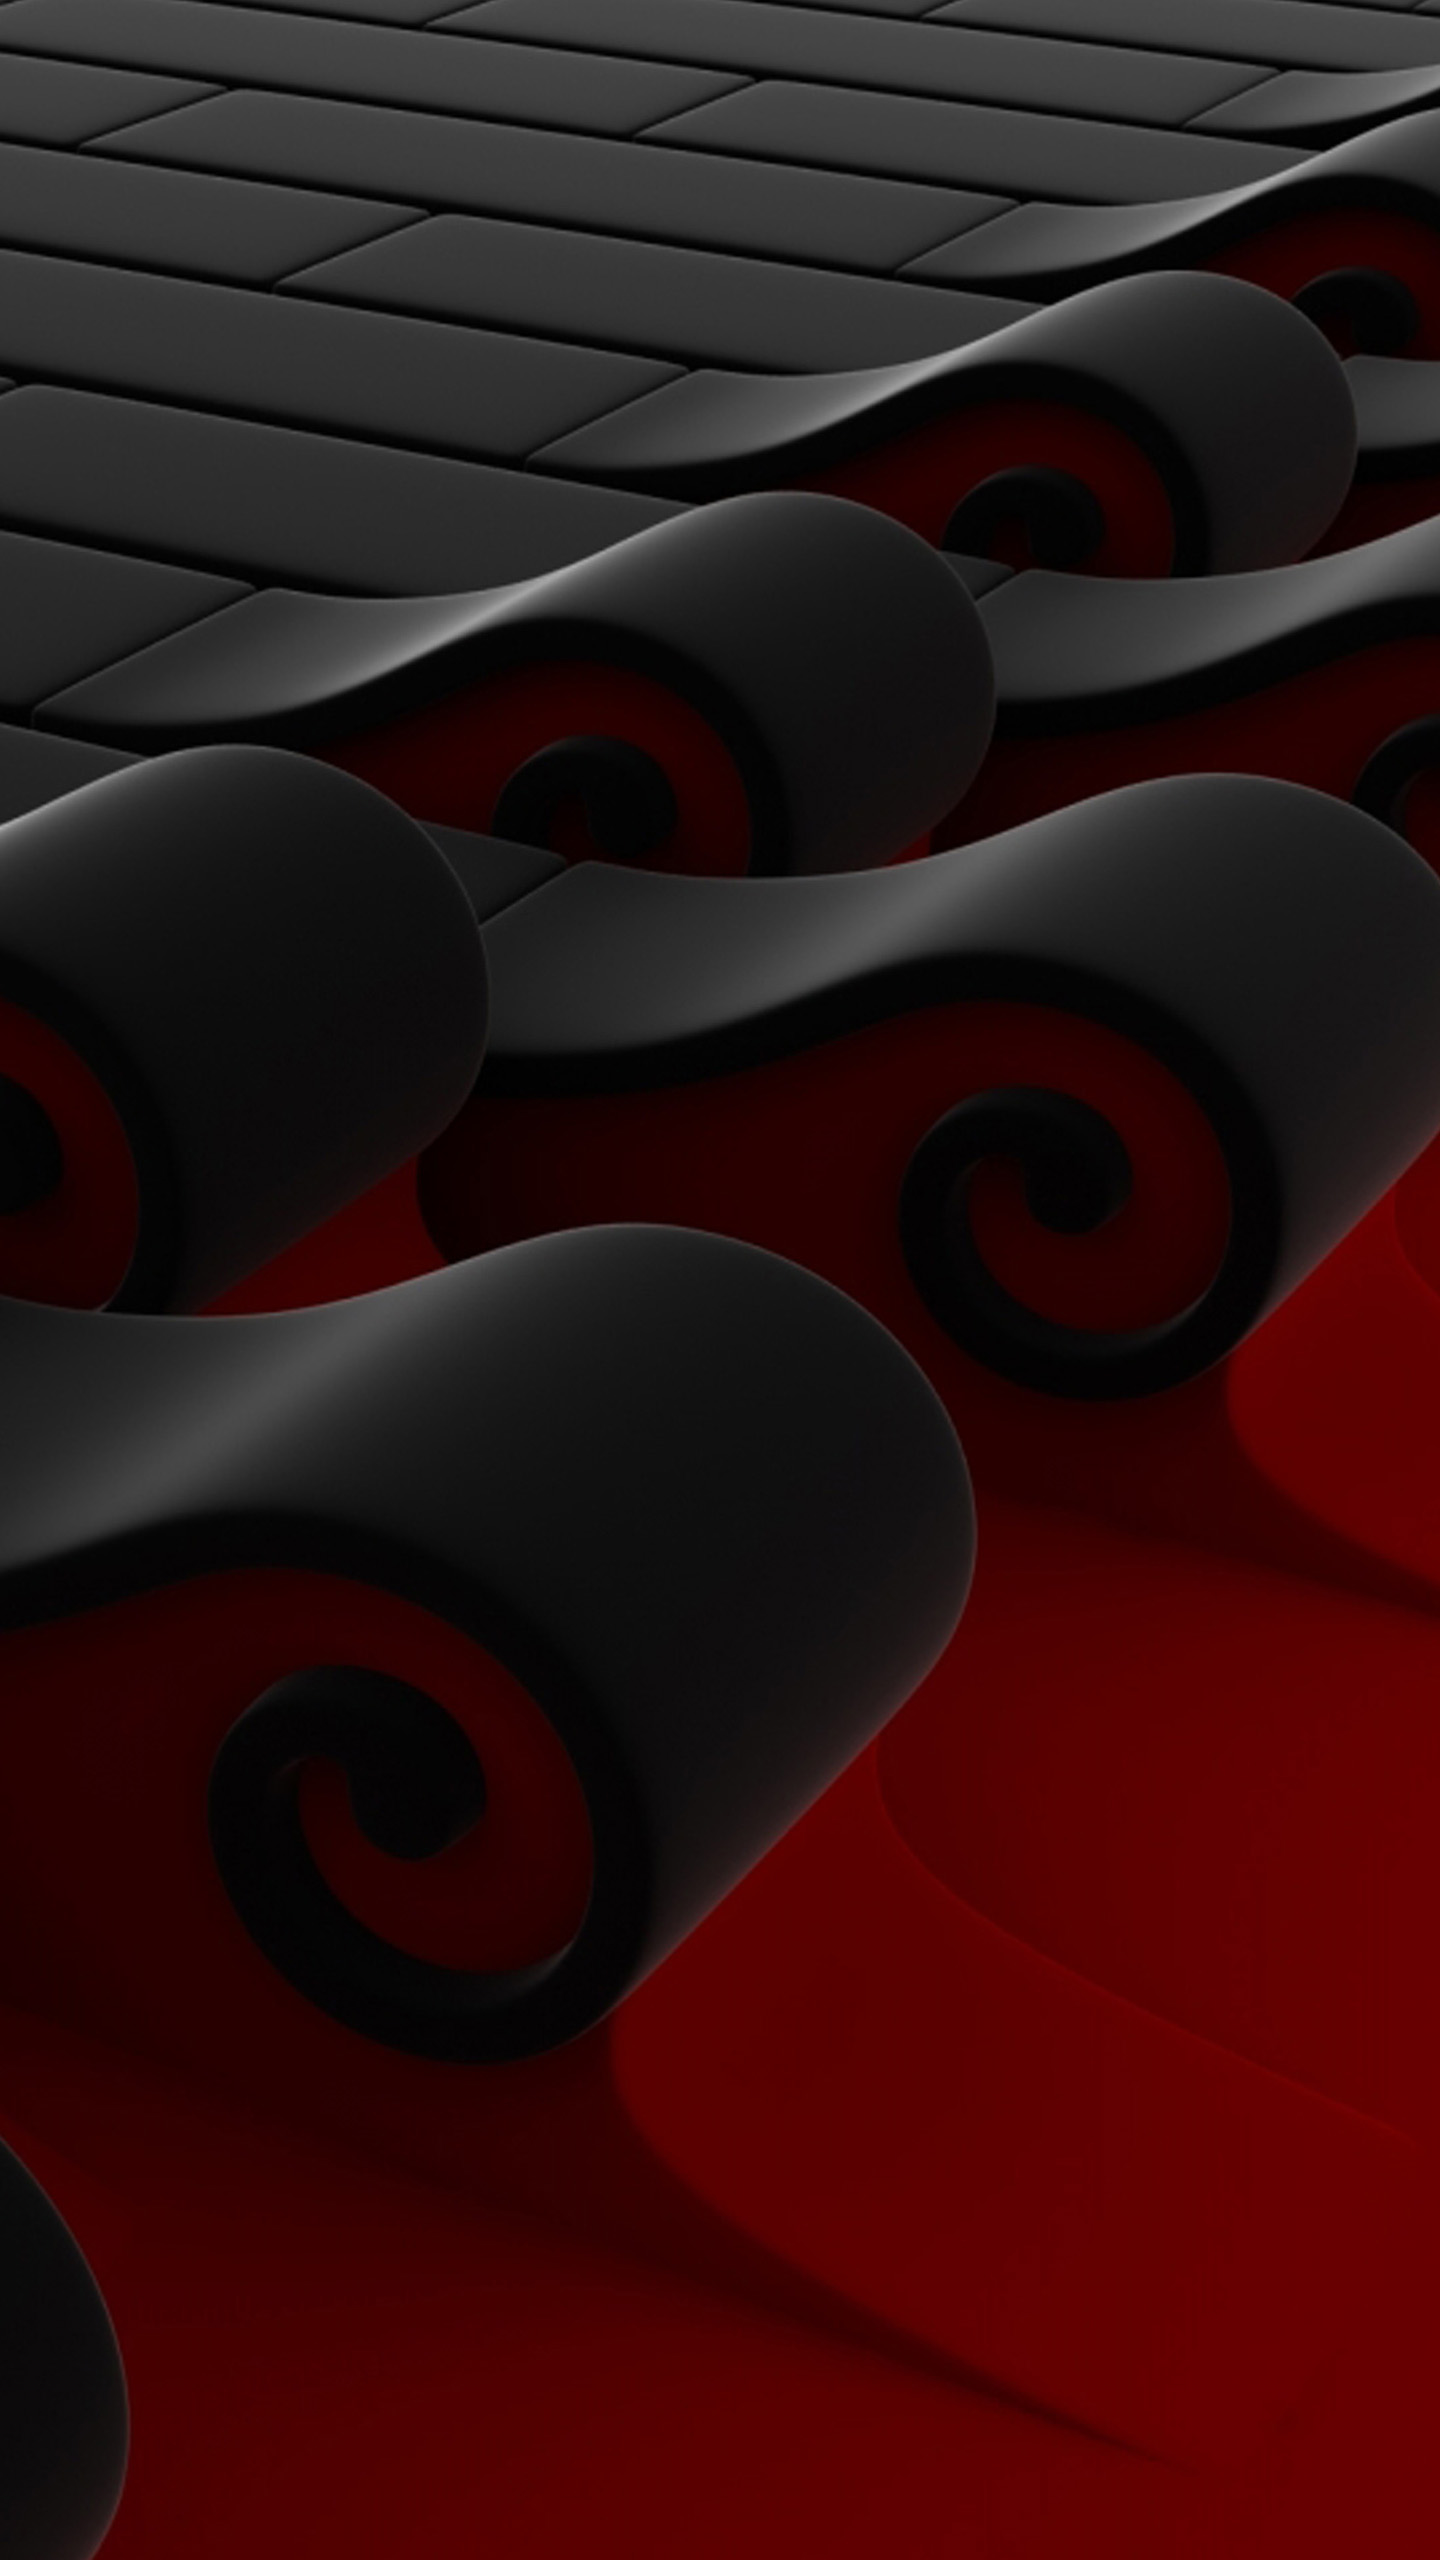 3D Abstract Iphone 5 Wallpapers